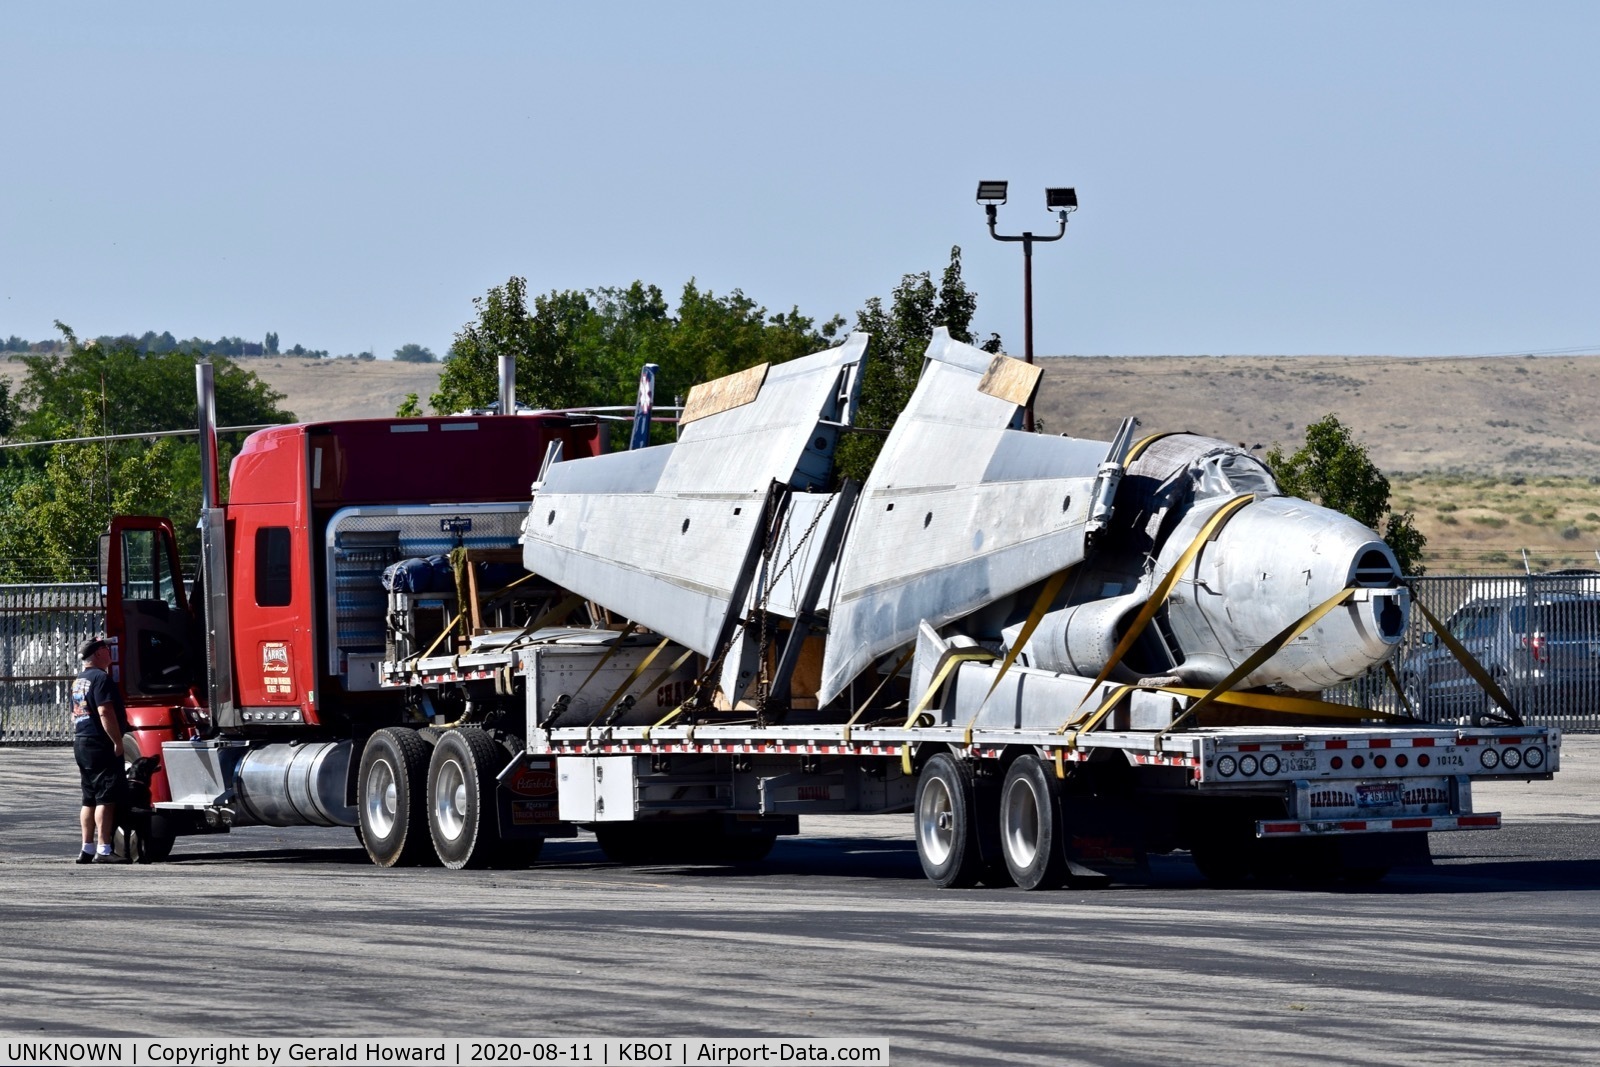 UNKNOWN, , This old T-33 fuselage has been sitting around the airport fo 20+ years. Looks like someone found some wings for it and it is off to somewhere. Hopefully who ever got it has the money to make it fly again.